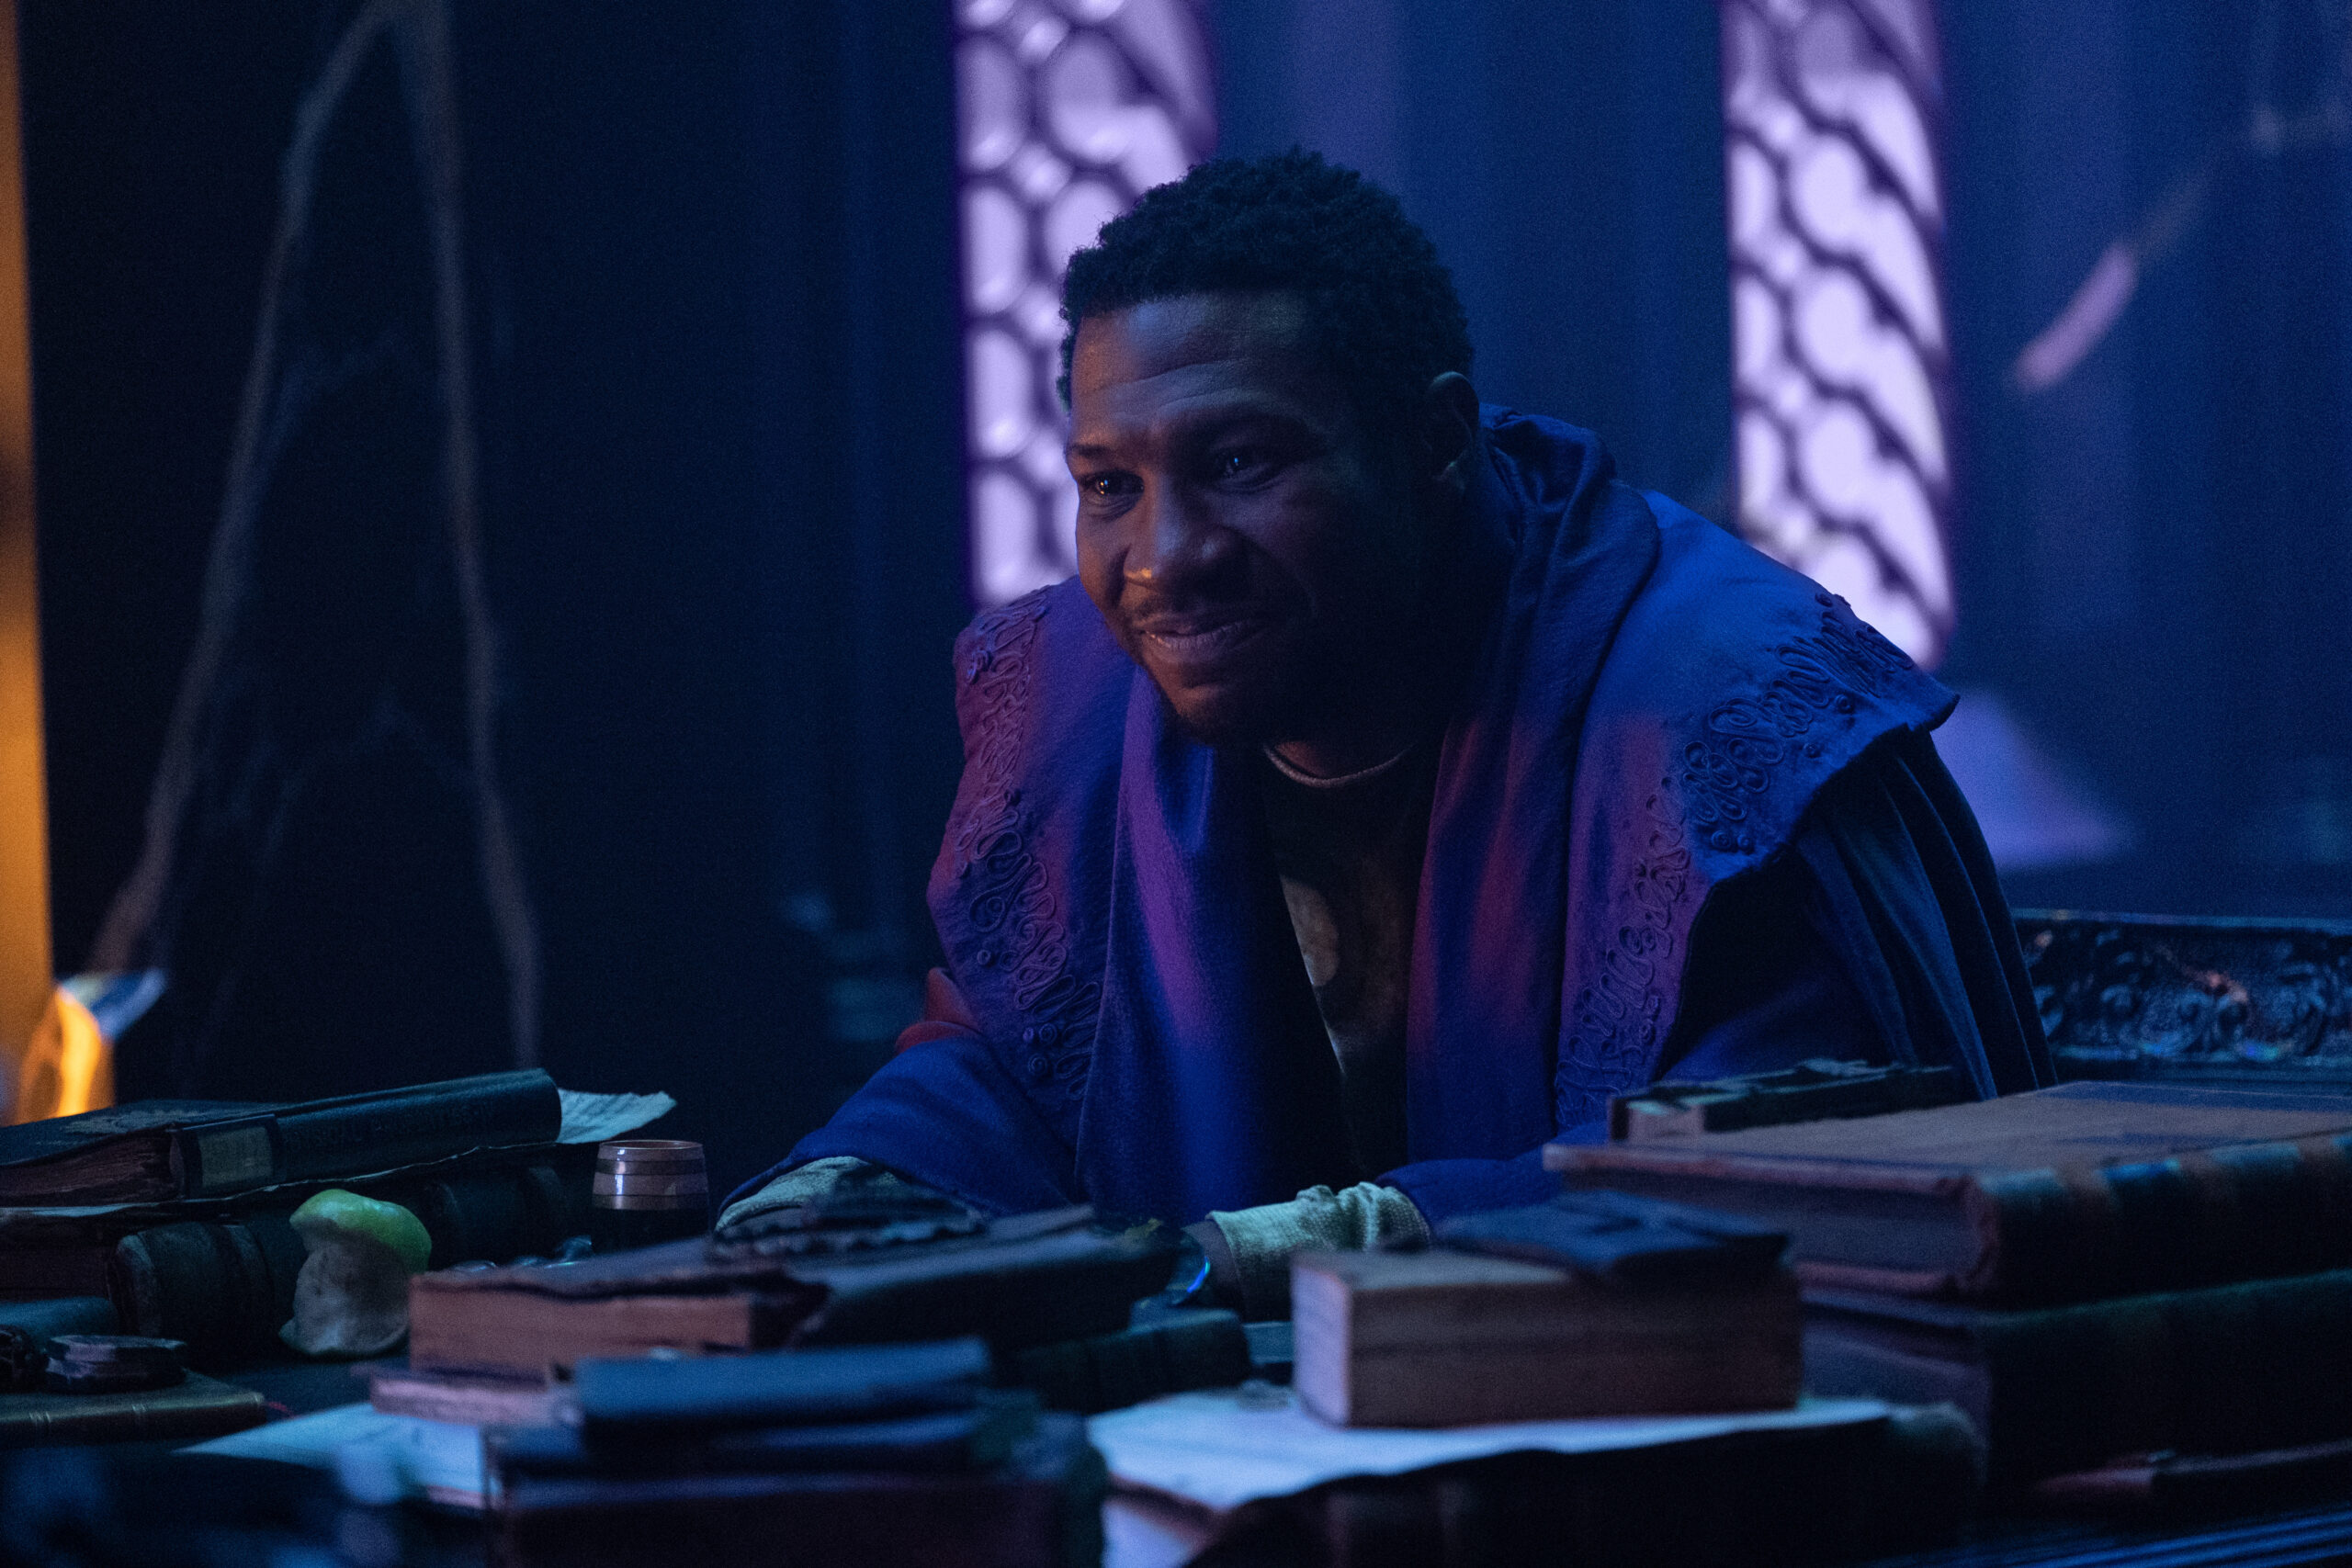 He Who Remains (Jonathan Majors) in Marvel Studios' LOKI, exclusively on Disney+. Photo by Chuck Zlotnick. ©Marvel Studios 2021. All Rights Reserved.